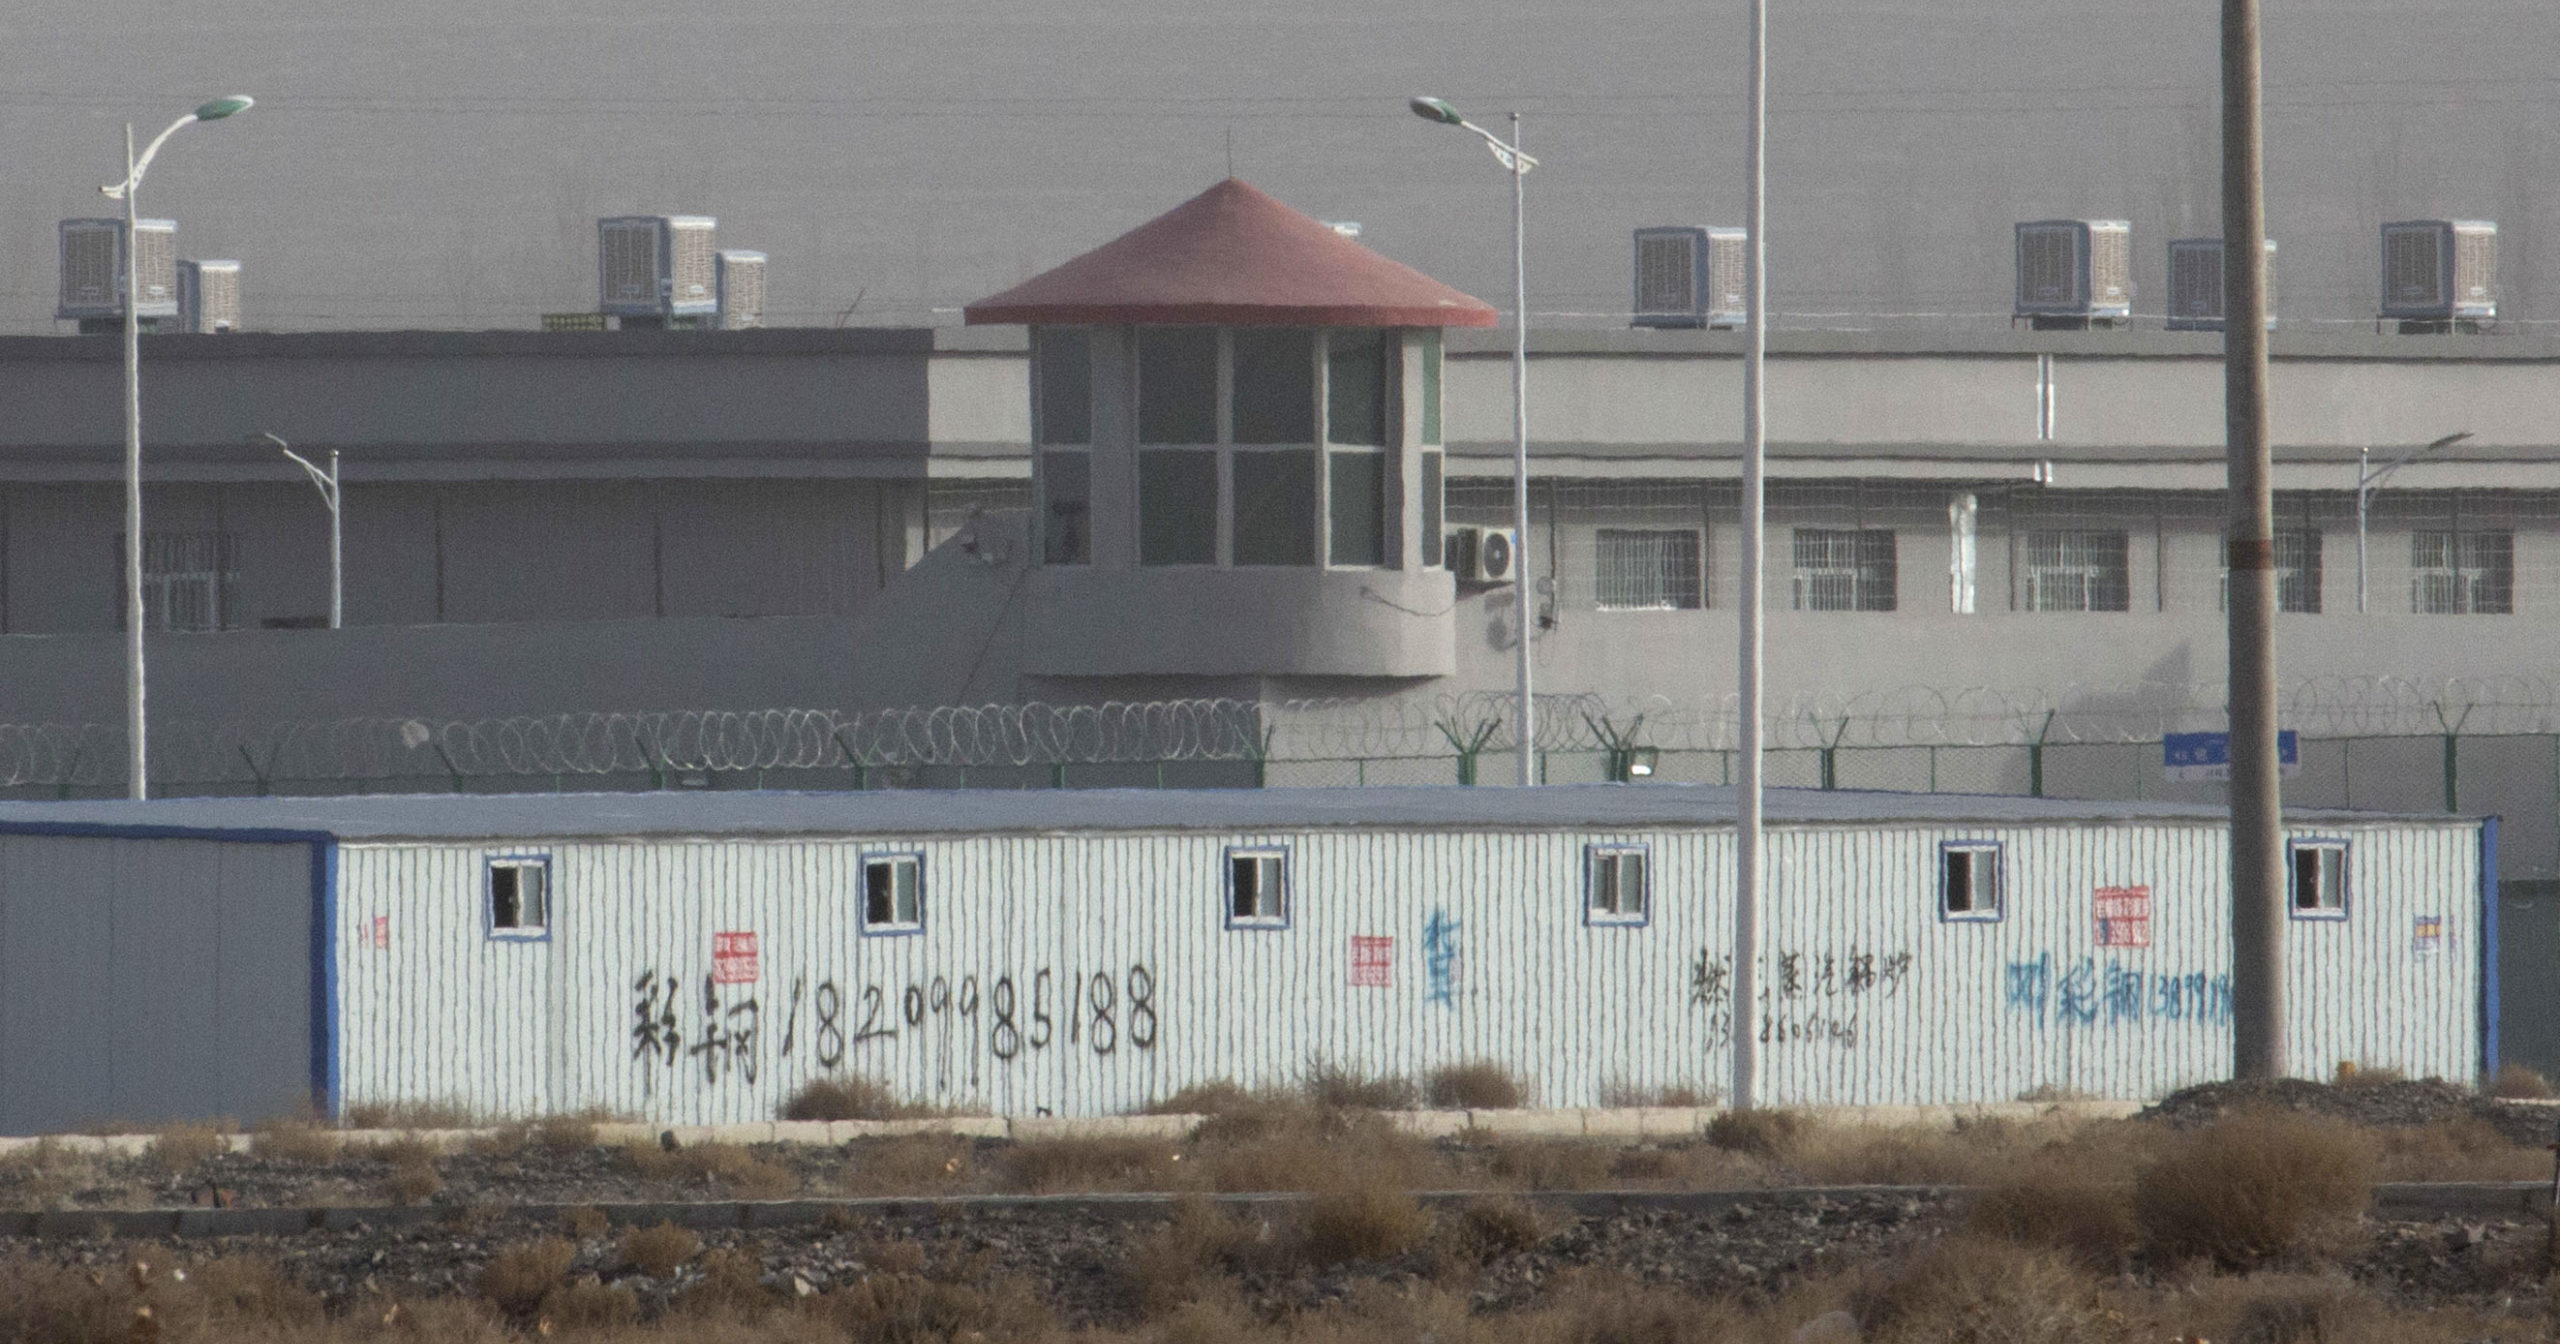 In this Dec. 3, 2018, file photo, a guard tower and barbed wire fences are seen around a facility in the Kunshan Industrial Park in western China's Xinjiang region. An Australian think tank says China appears to be expanding its network of secret detention centers in Xinjiang, where Muslim minorities are targeted in a forced assimilation campaign.